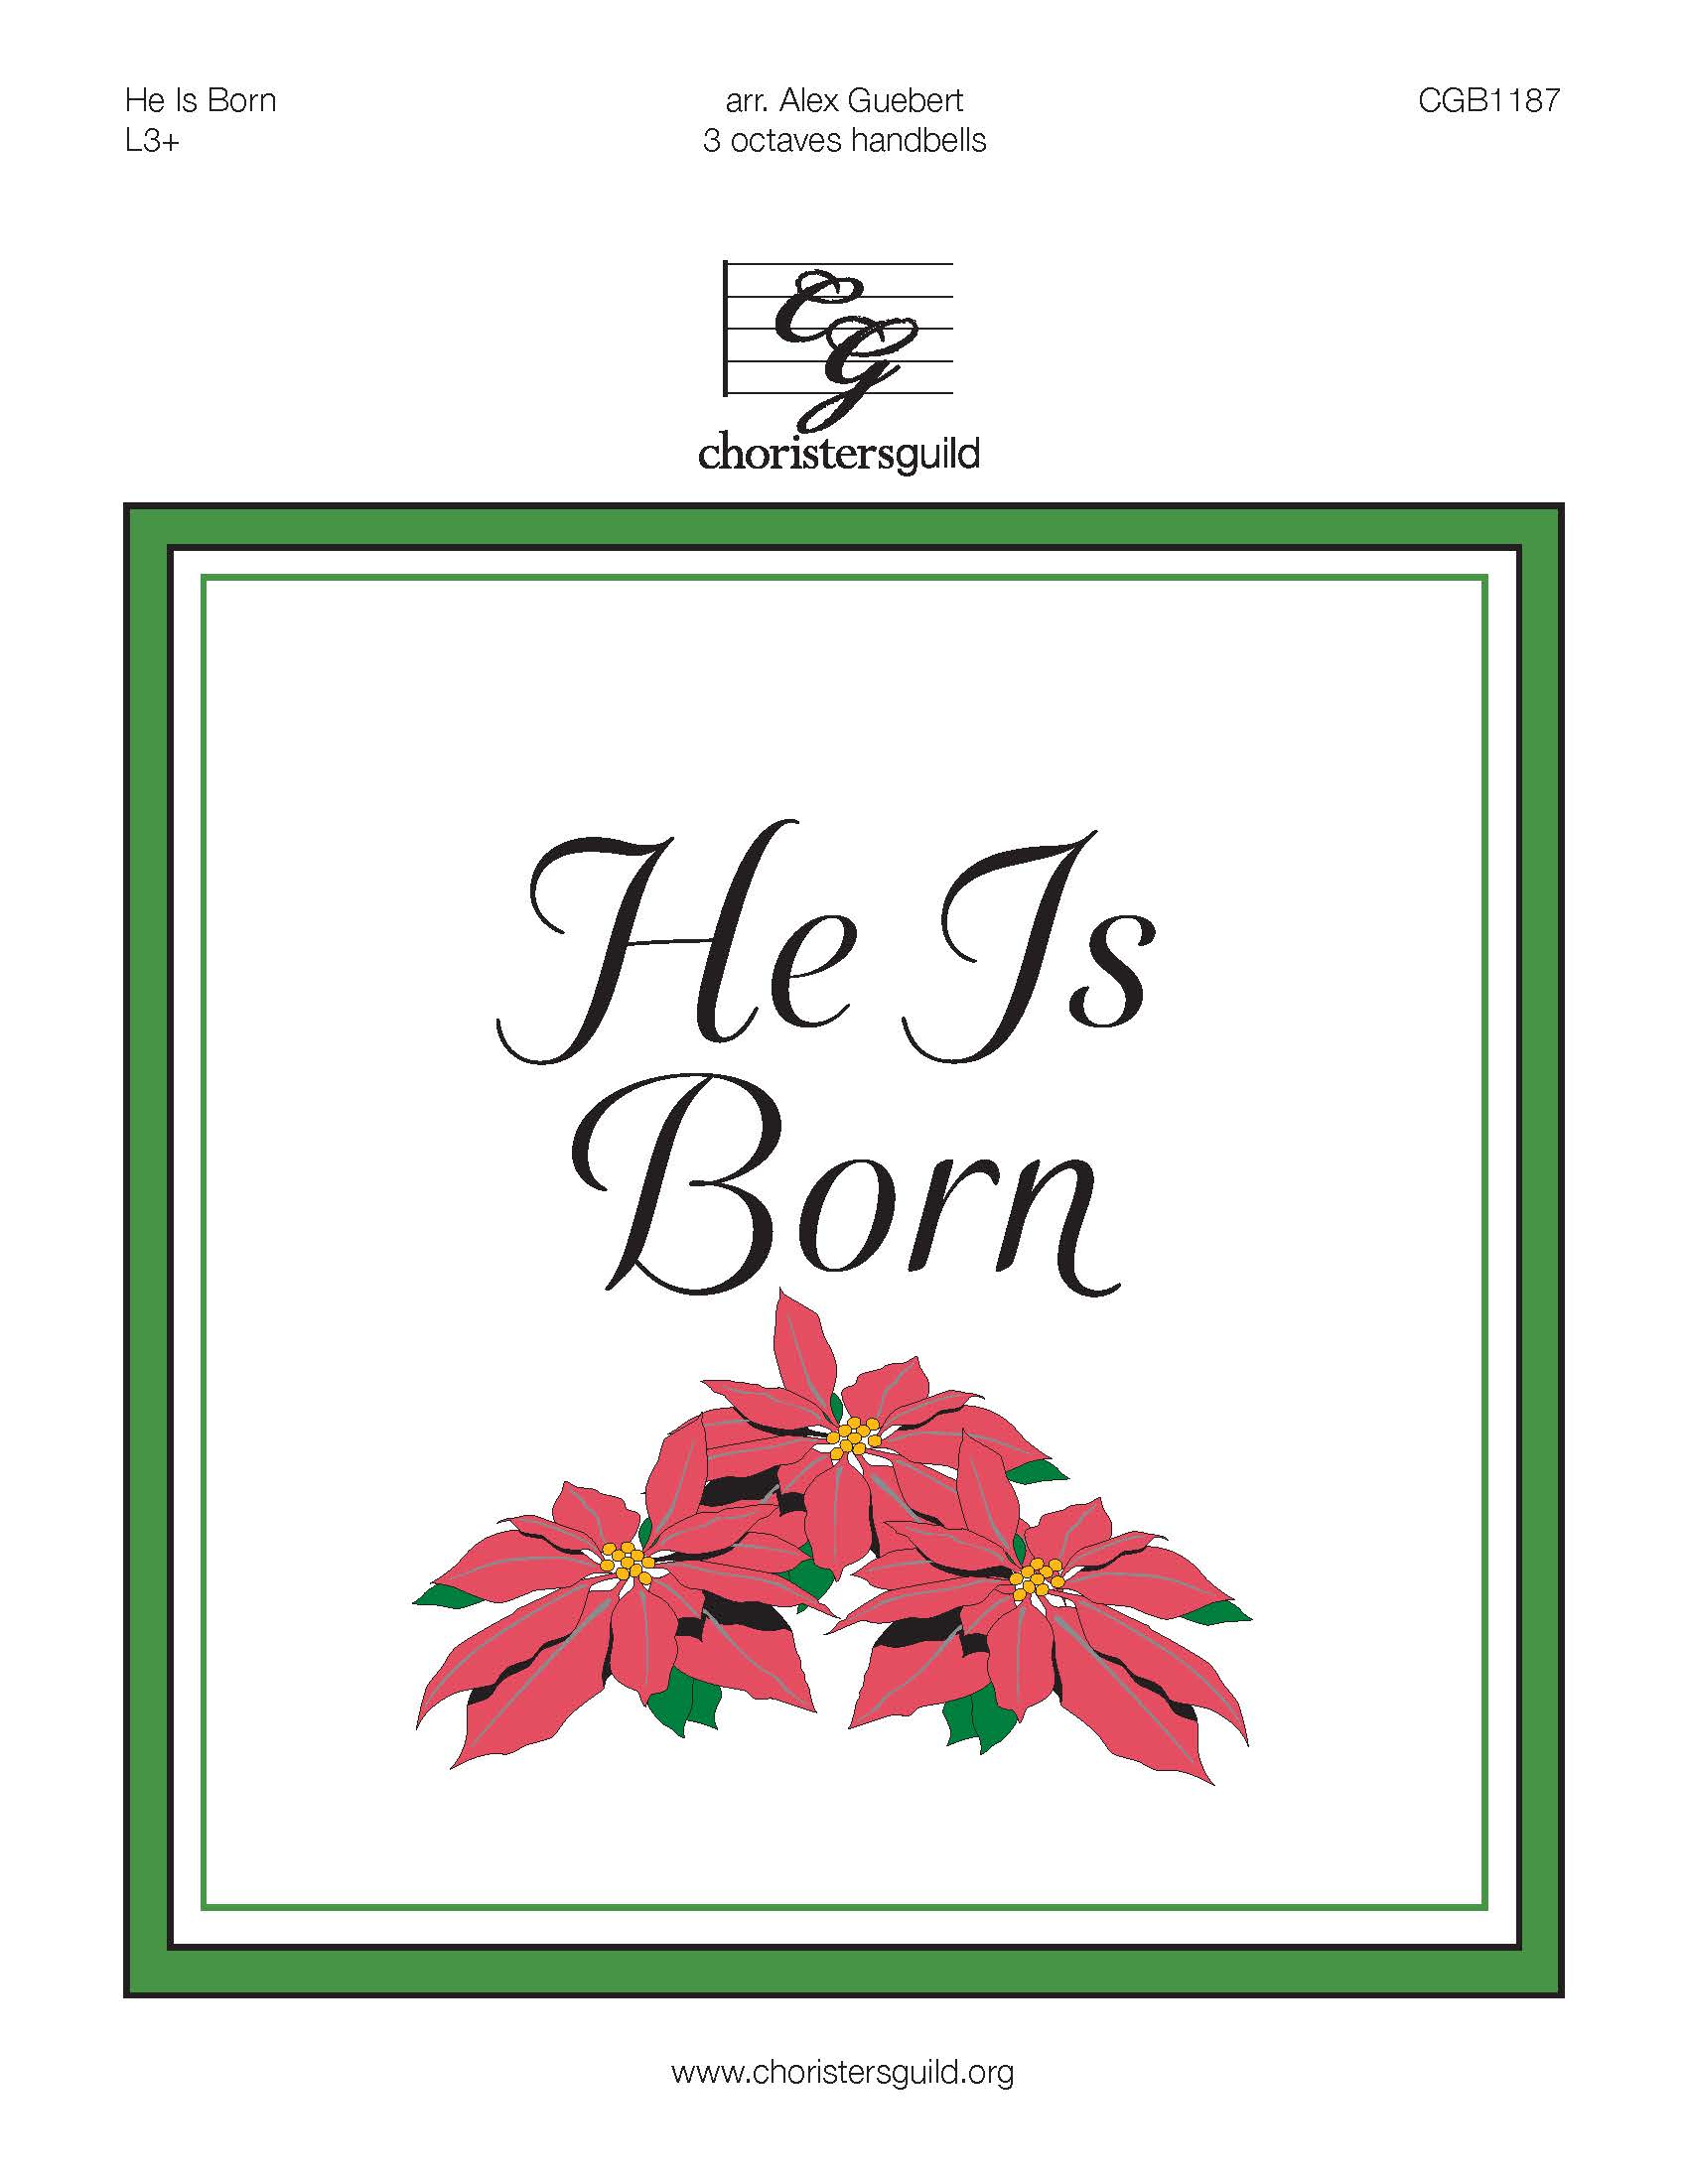 He is Born - 3 octaves